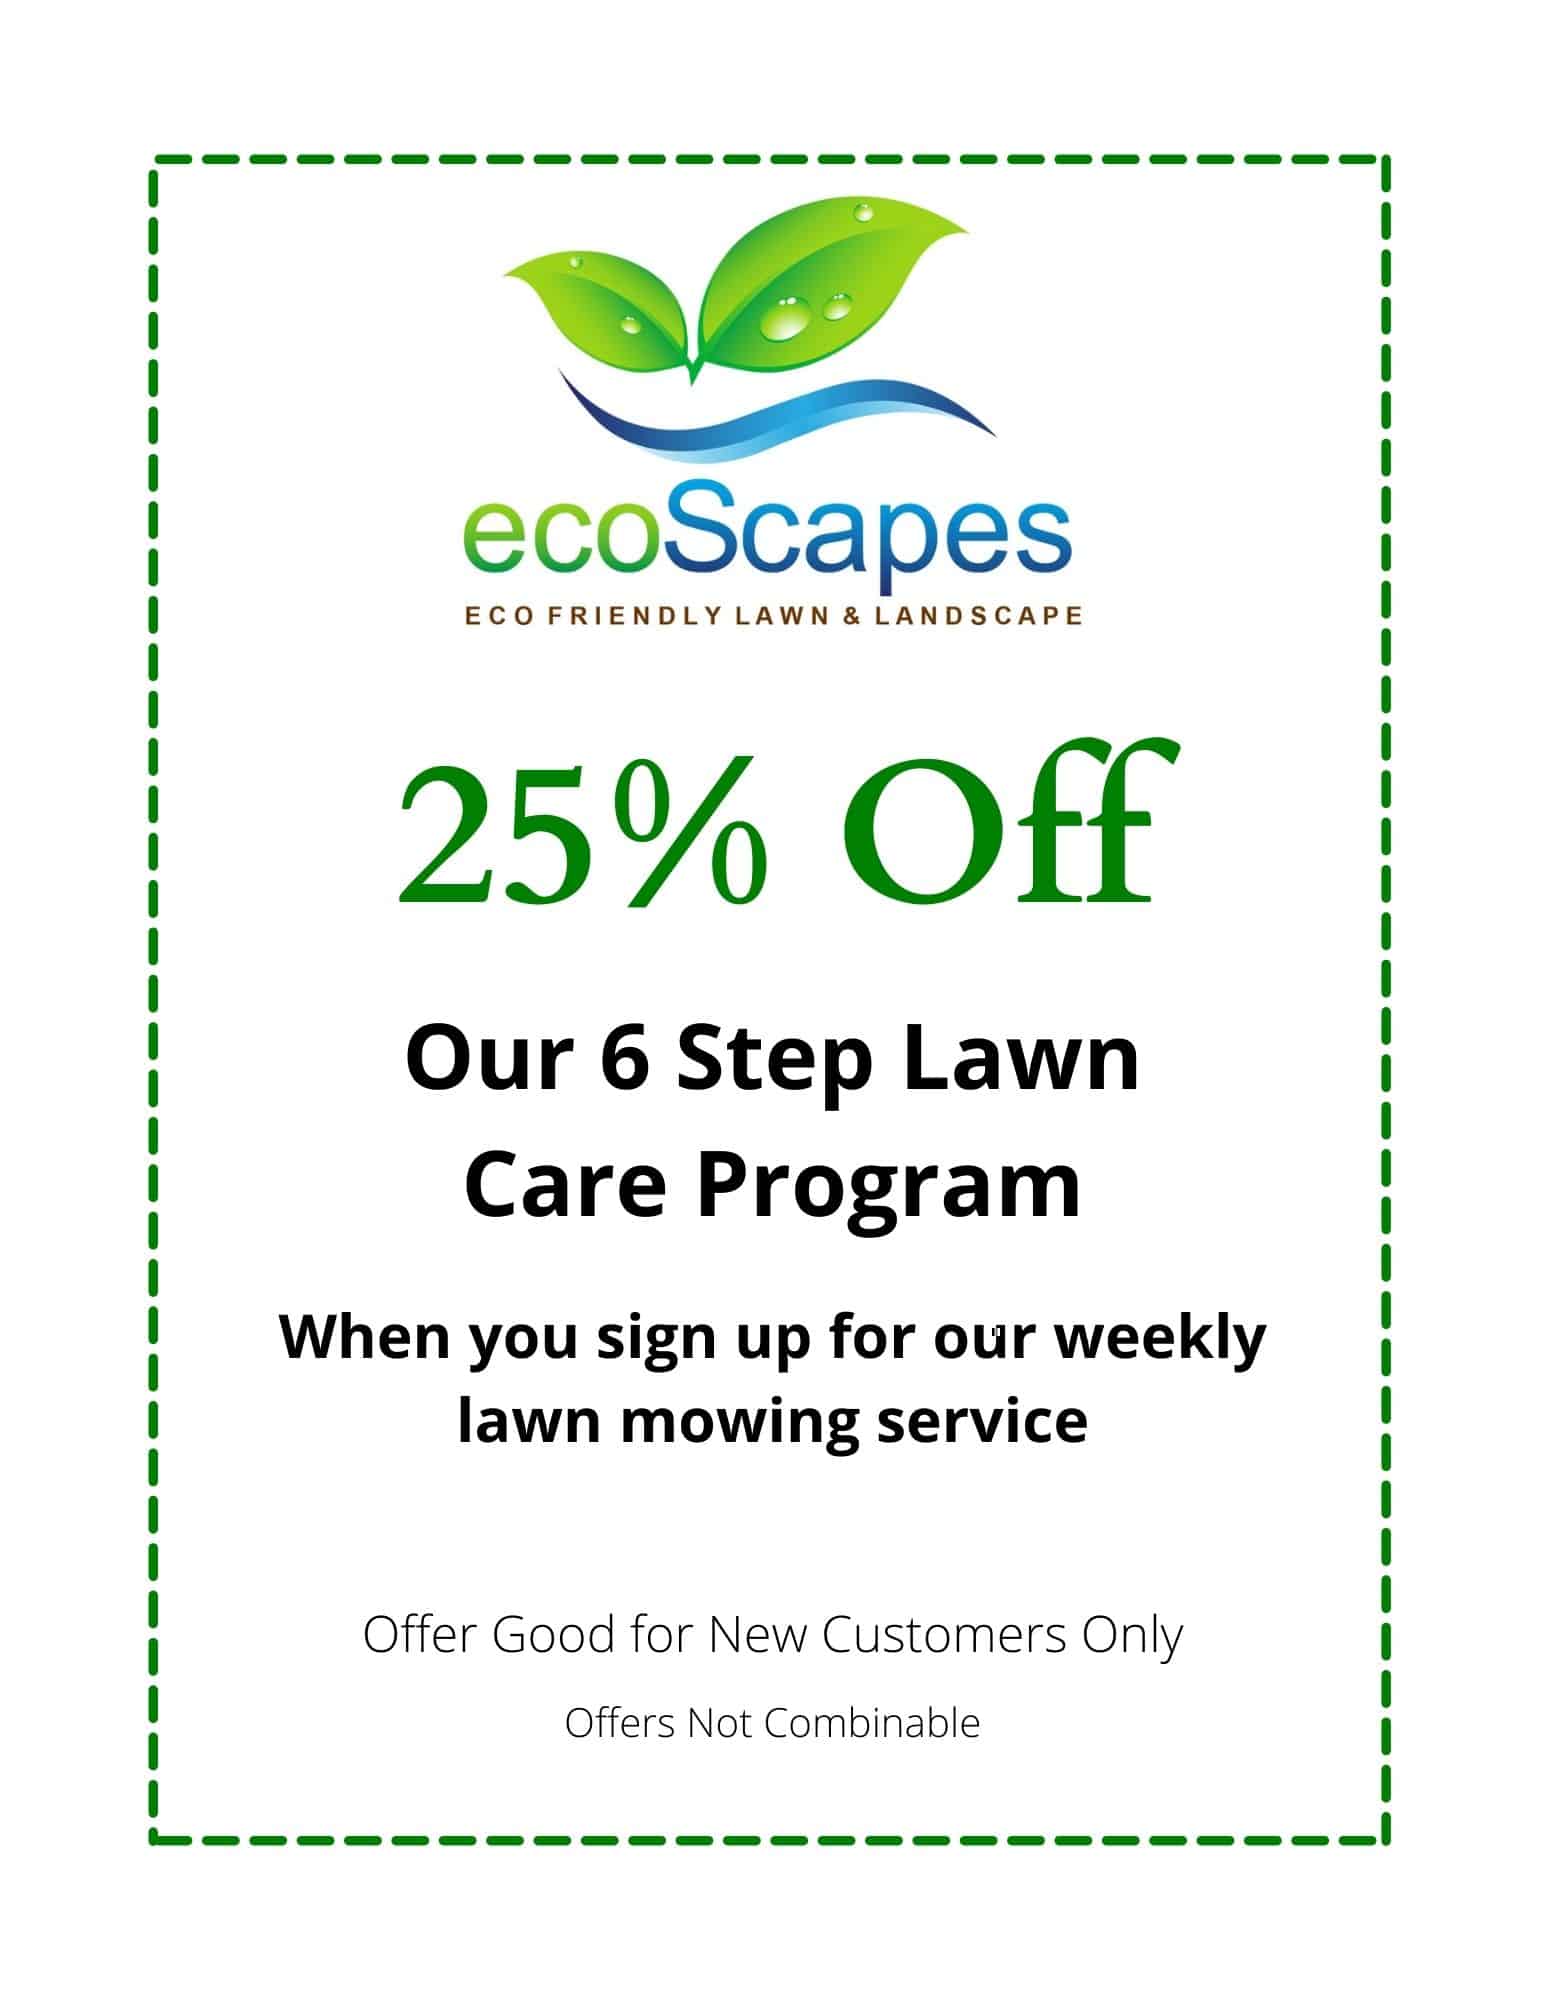 Coupon to Save 25 percent on EcoScapes Lawn Care Program